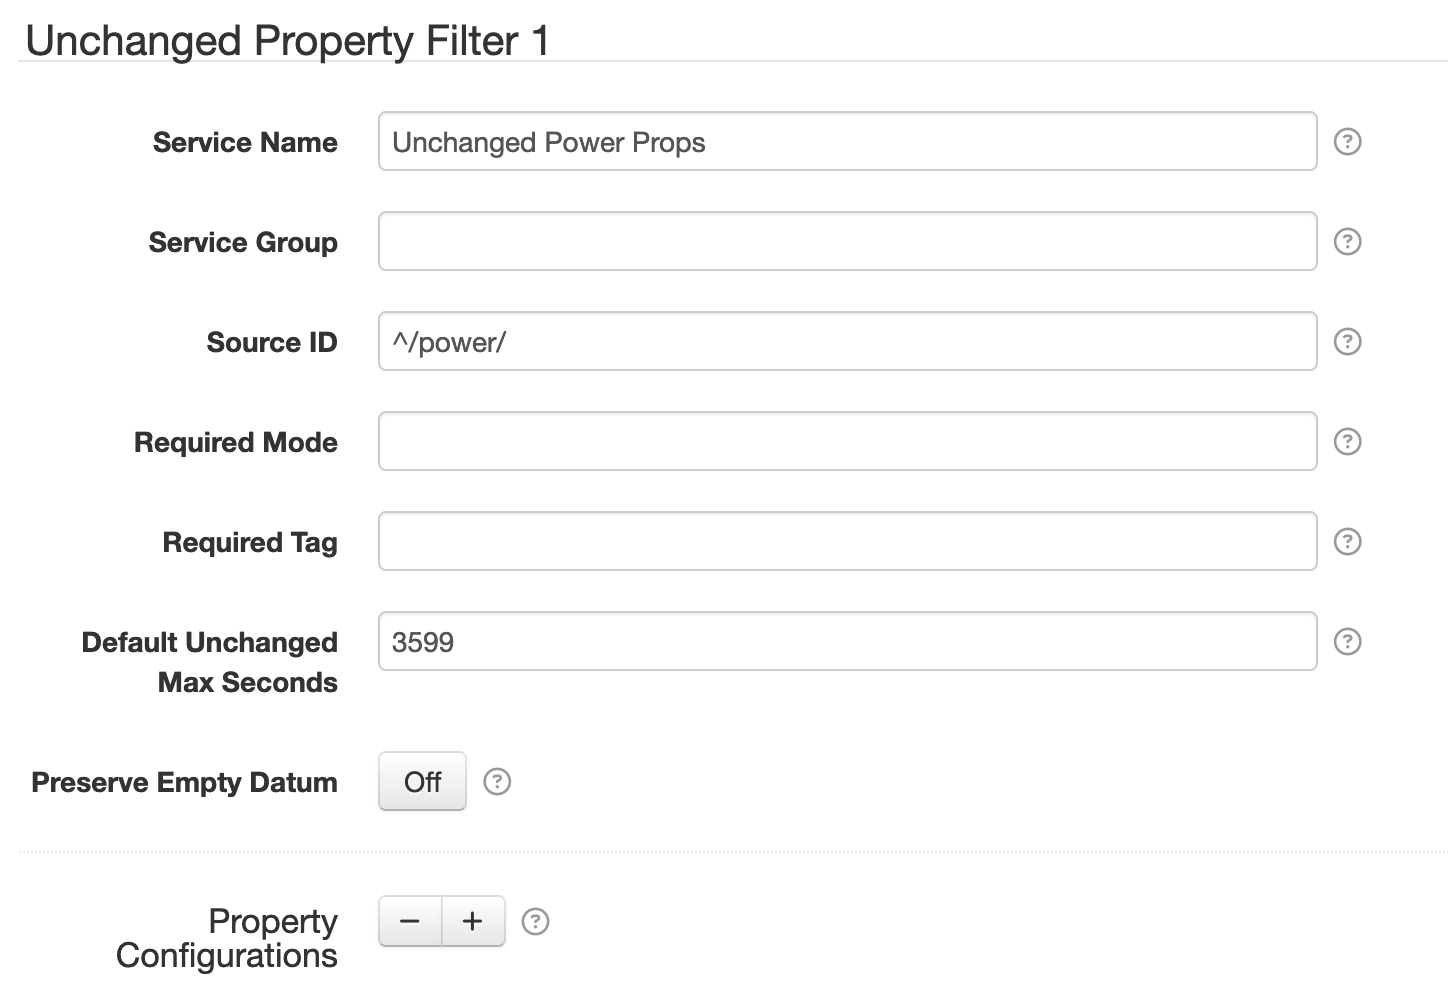 Unchanged Property filter component settings